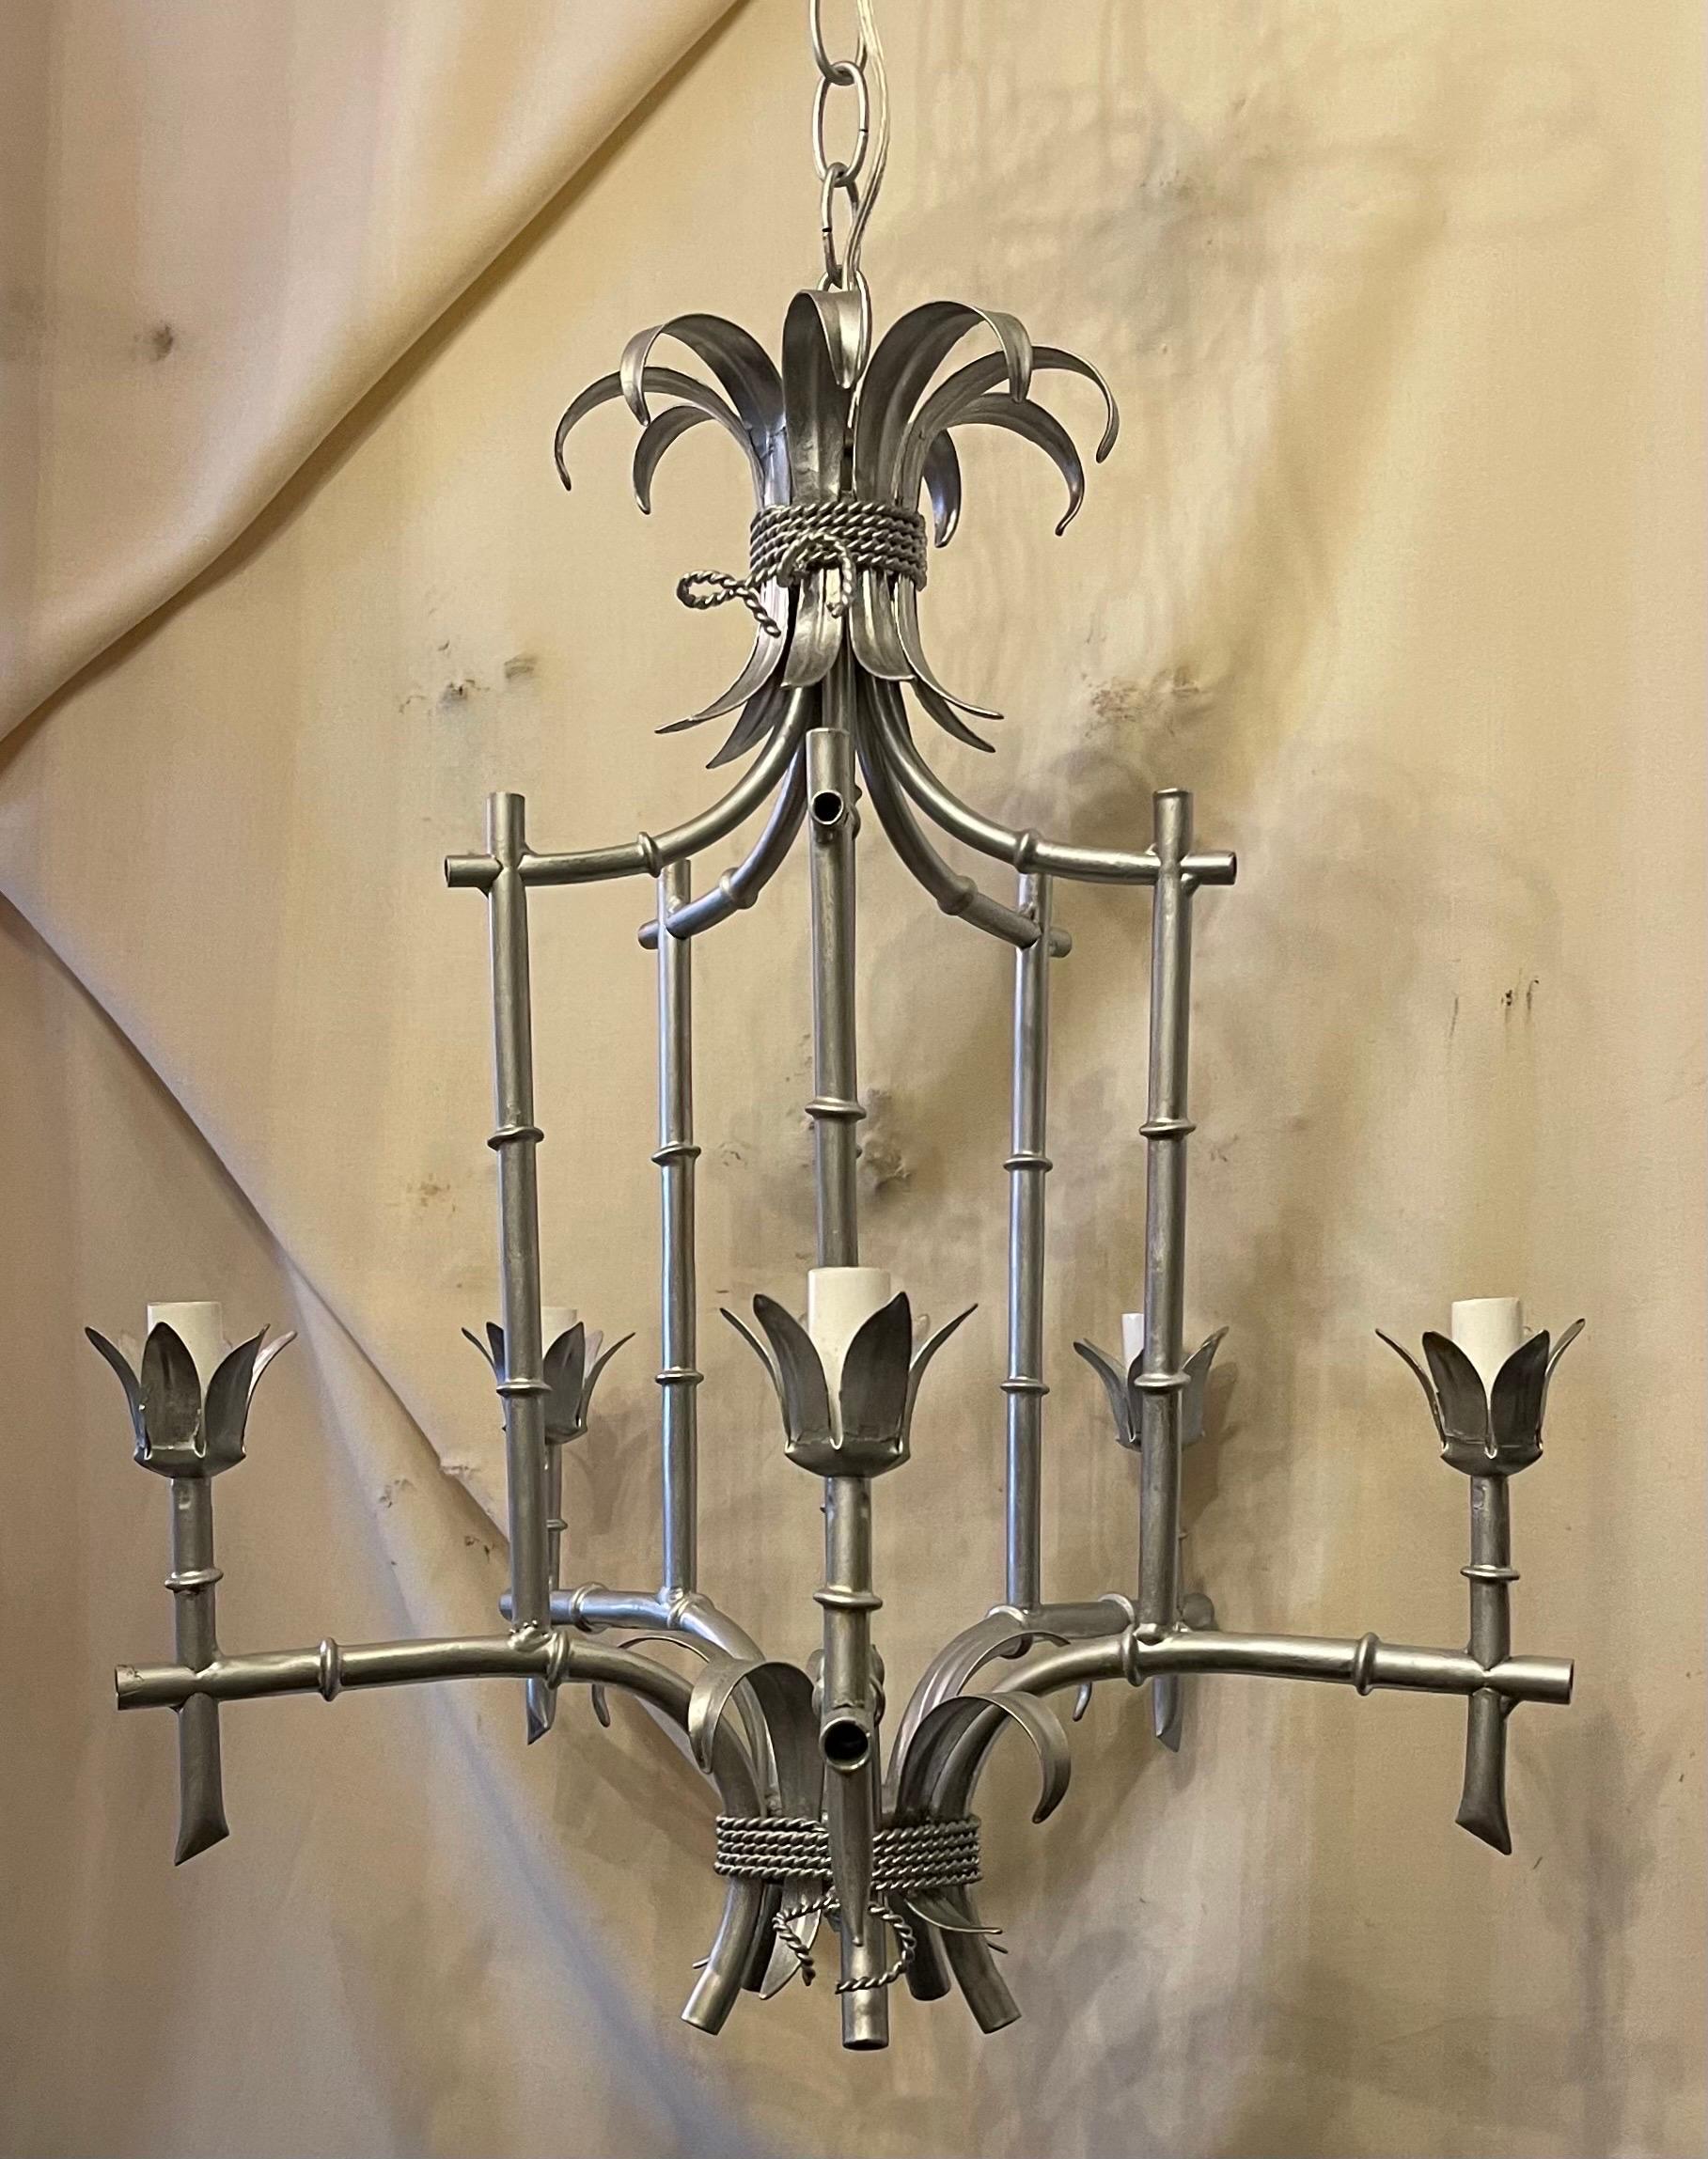 A Wonderful Silver Gilt Tole Pagoda Bamboo Chinoiserie Form 5 Candelabra Light Chandelier, This Fixture Comes Ready To Install With Chain Canopy and Mounting Hardware.
Wiring Has Been Up Dated 